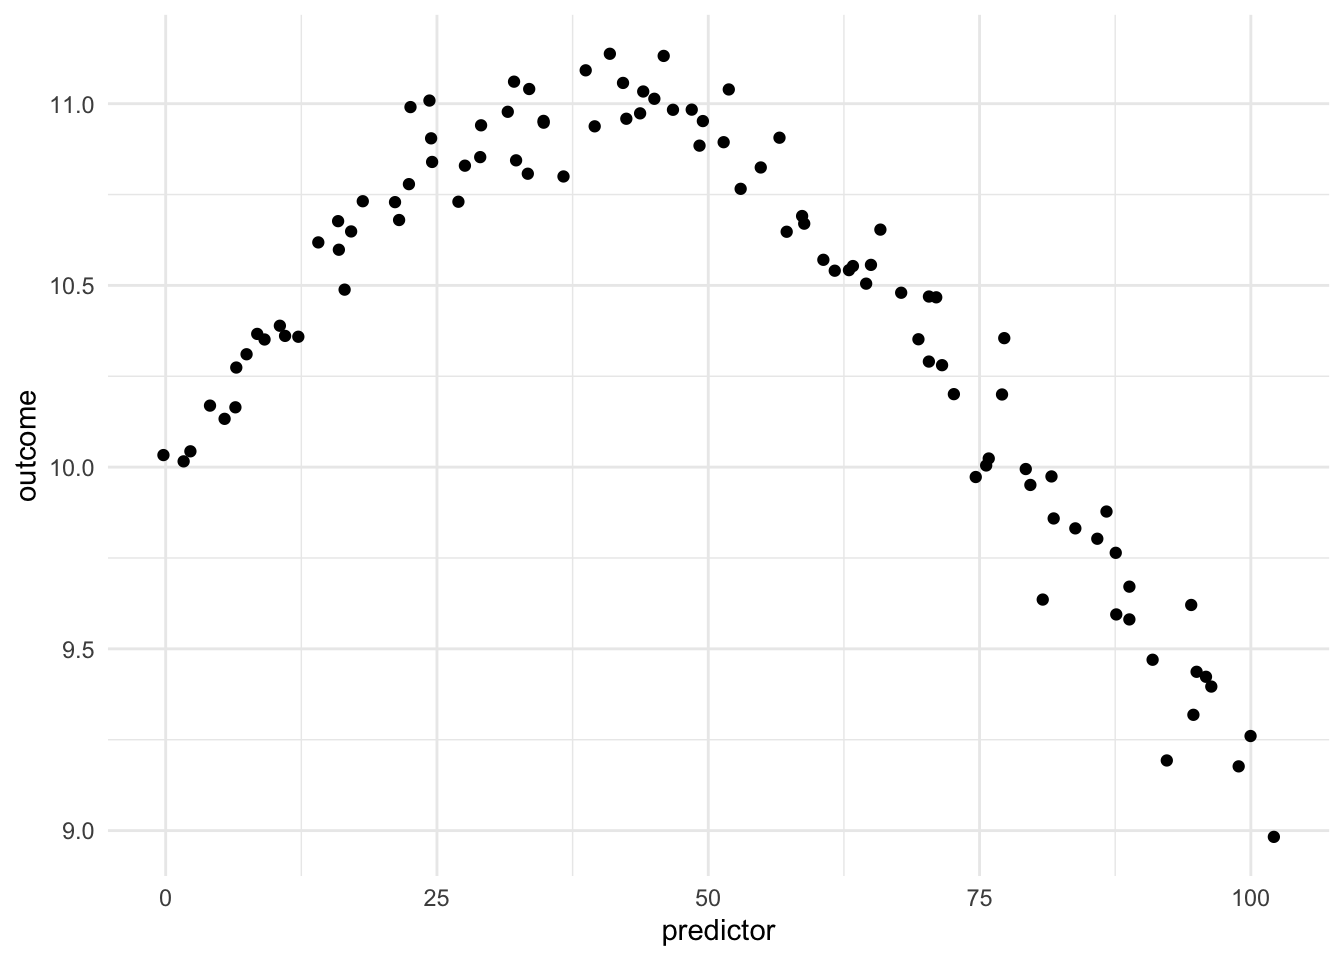 Scatter chart. Predictor along the x-axis and outcome along the y-axis. The data has some wiggliness to it, but it follows a curve. You would not be able to fit a straight line to this data.